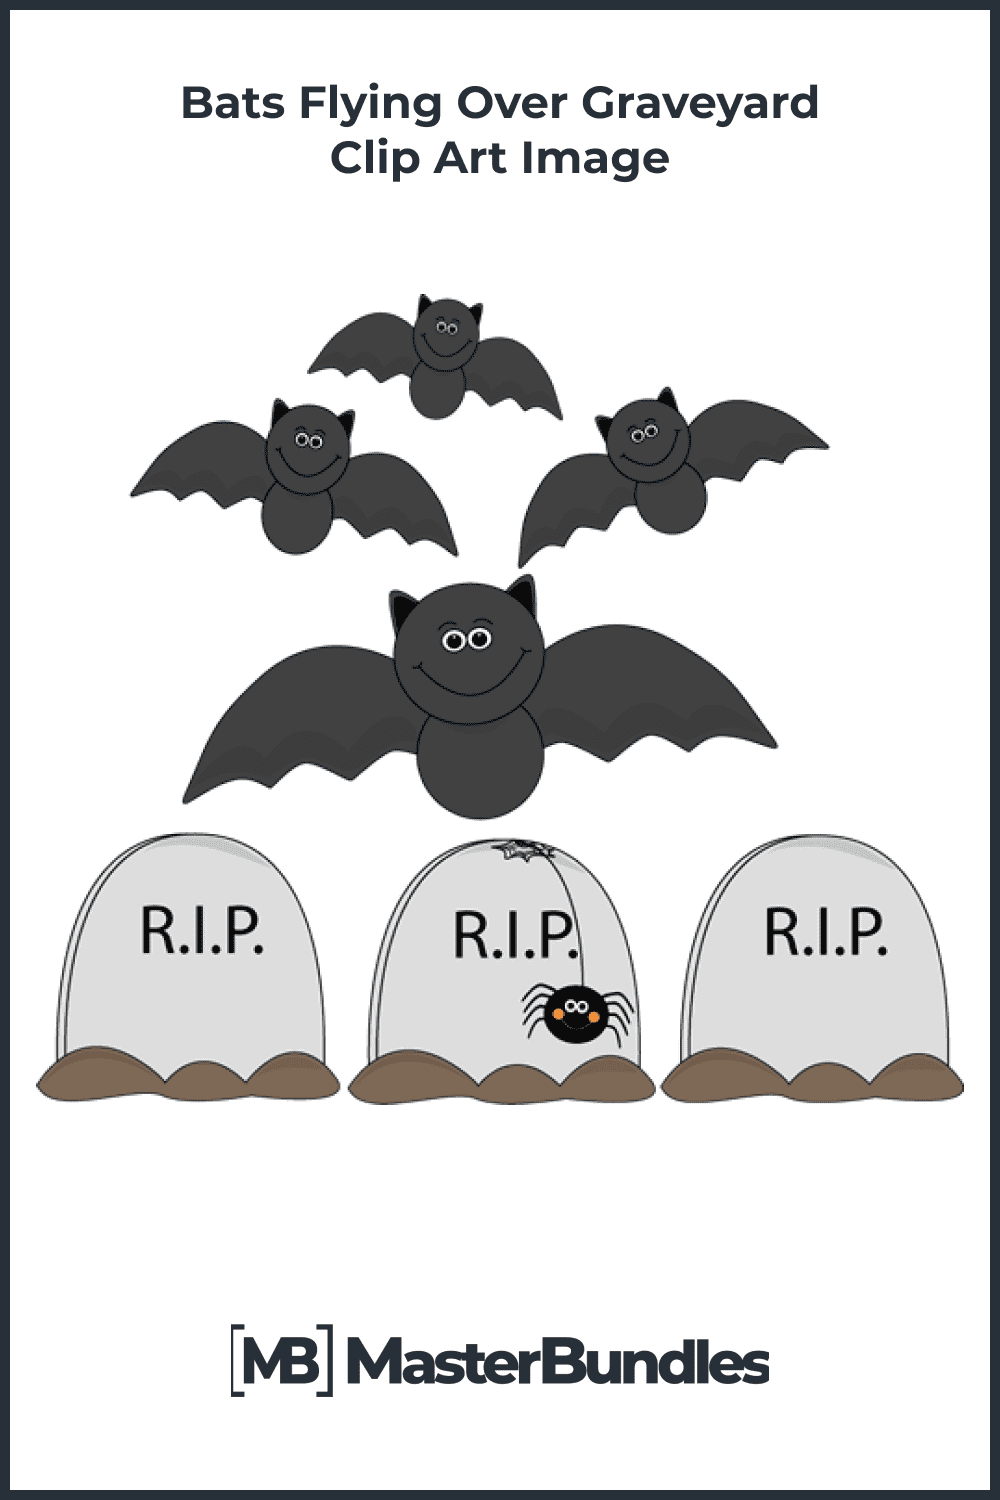 Kind bats in the cemetery.